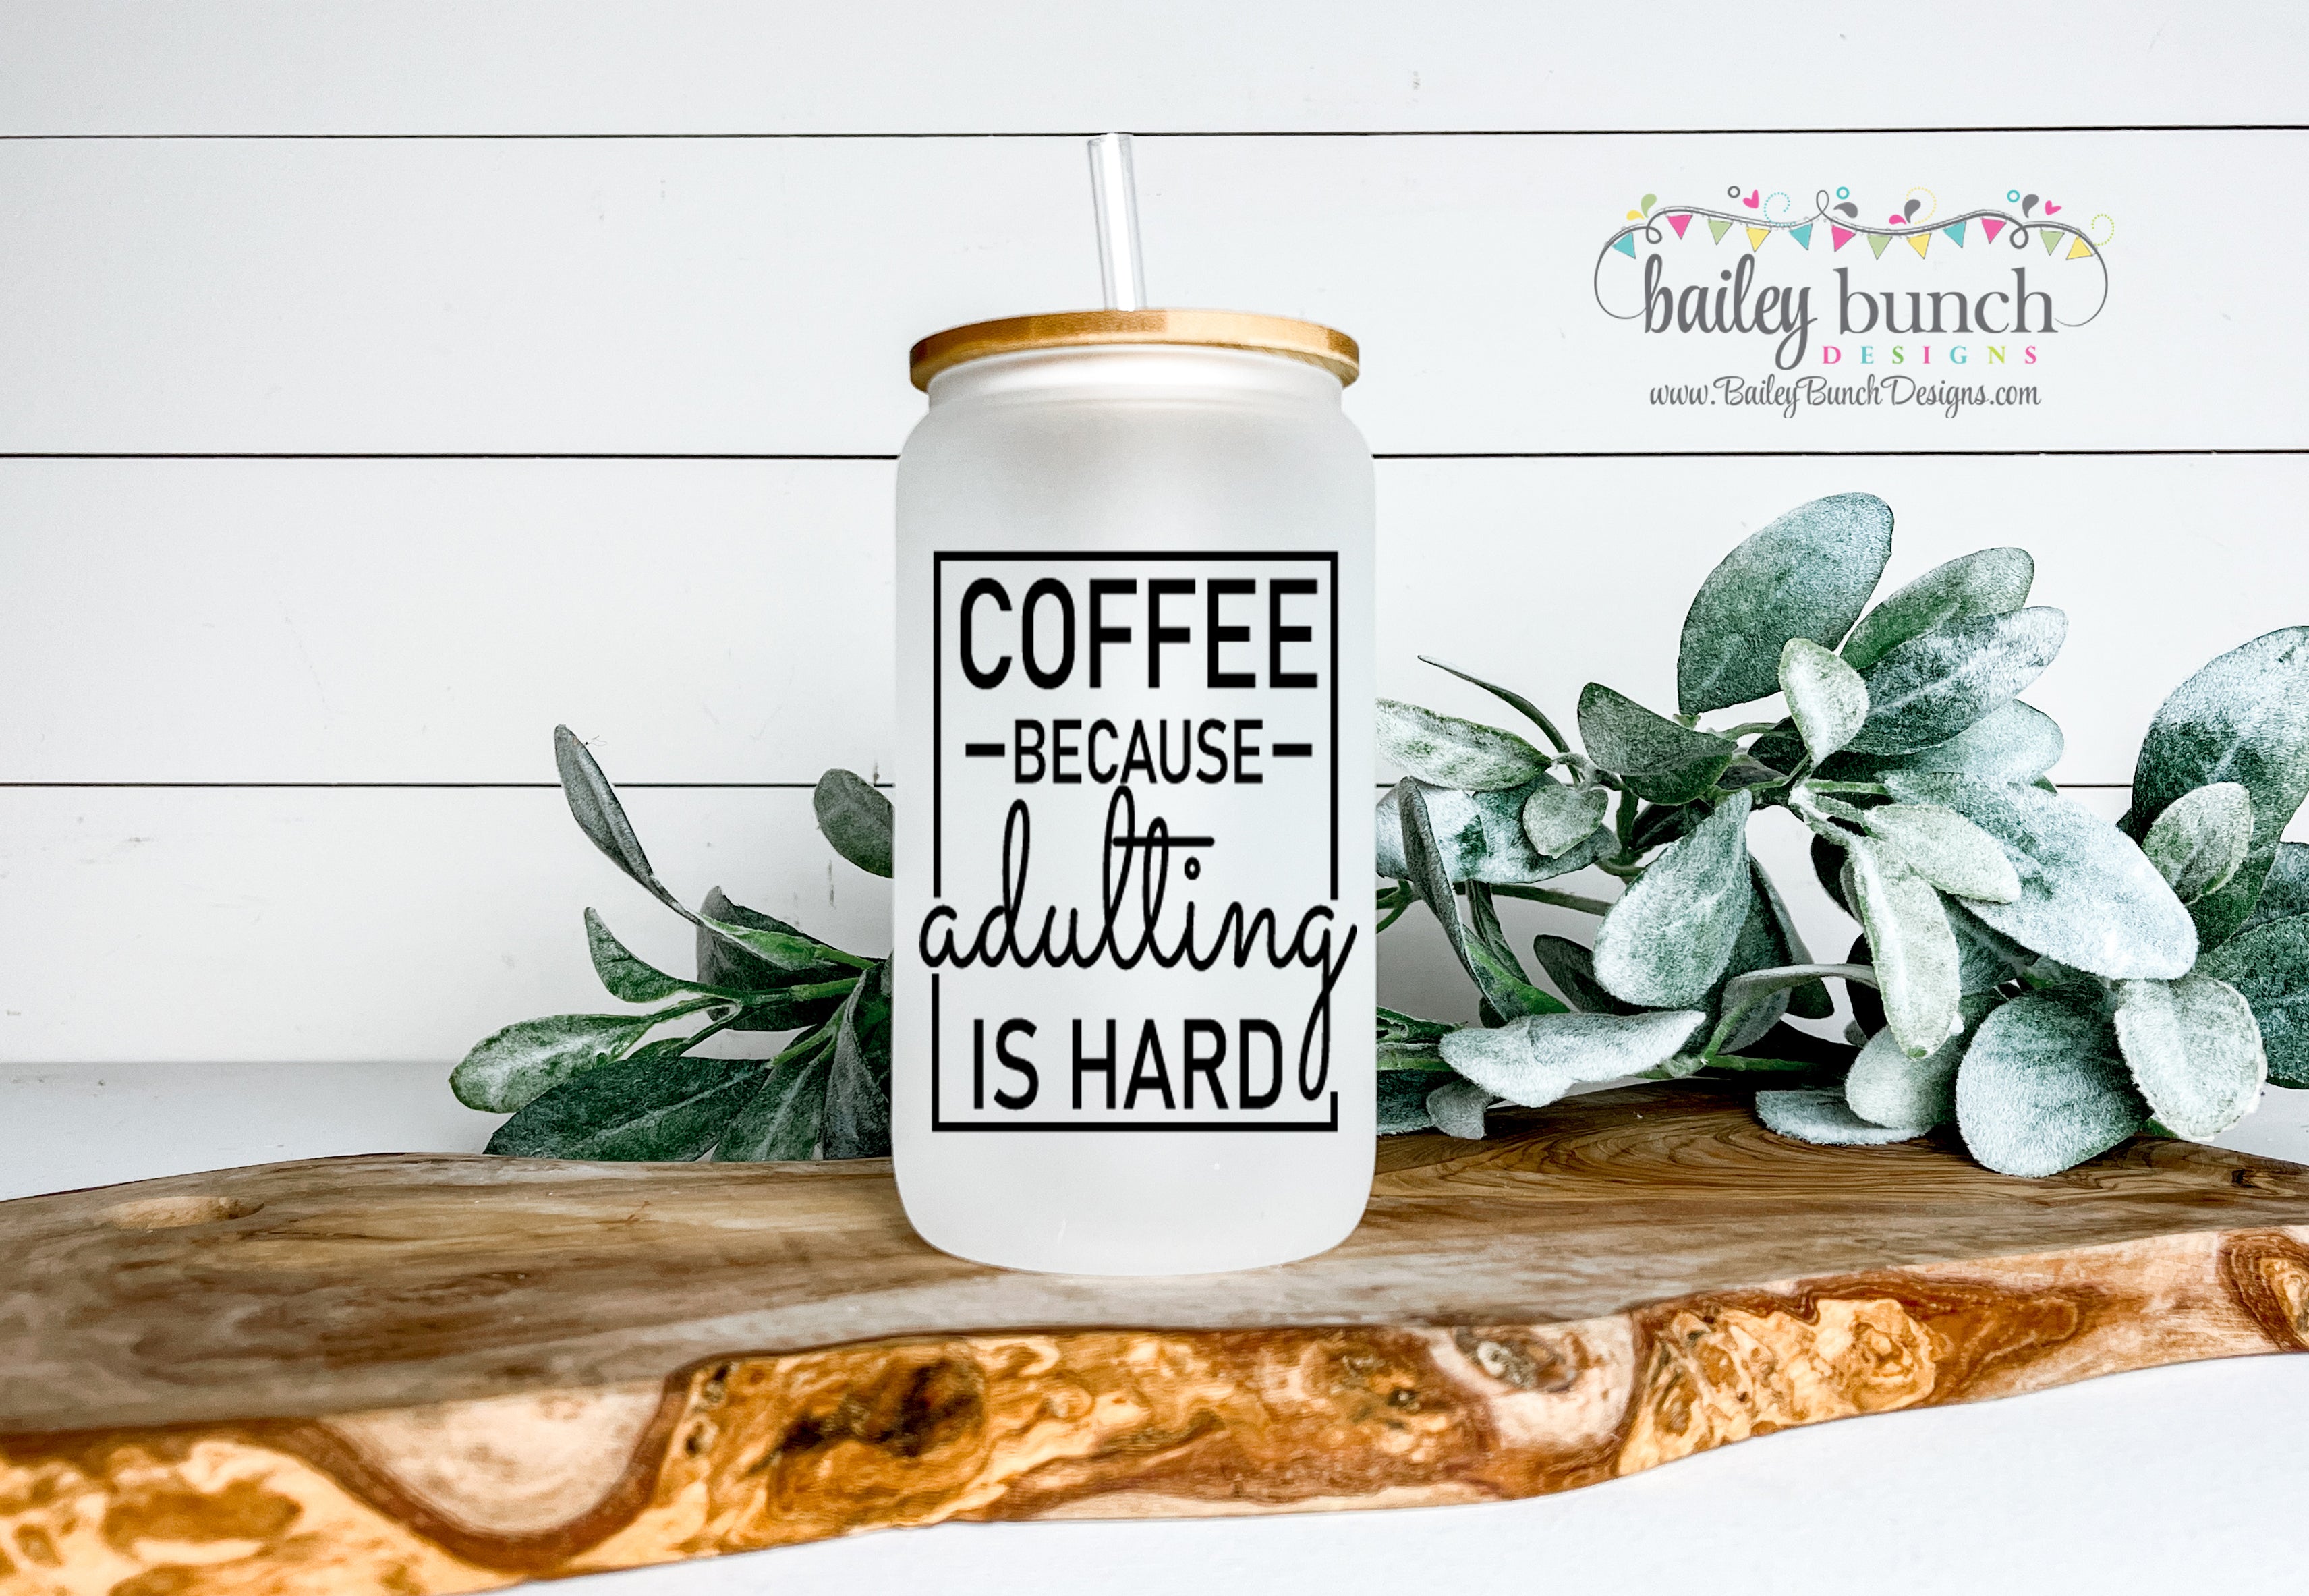 Iced Coffee Cup with Lid and Glass Straw - Beer can Glass - Teacher Gifts